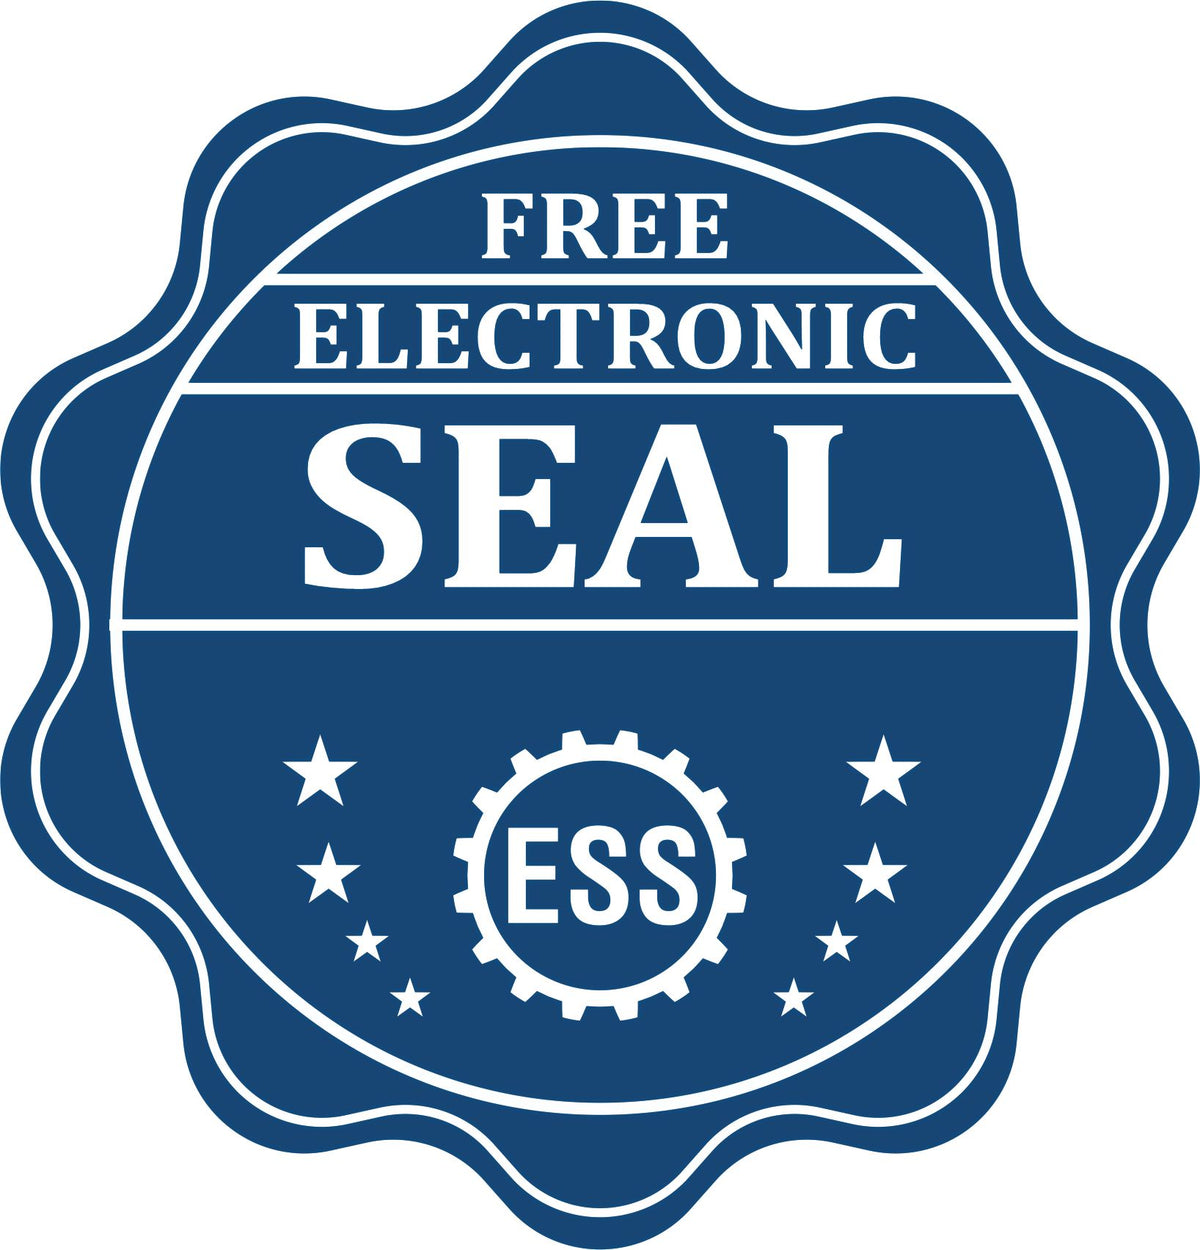 A badge showing a free electronic seal for the Ohio Geologist Desk Seal with stars and the ESS gear on the emblem.